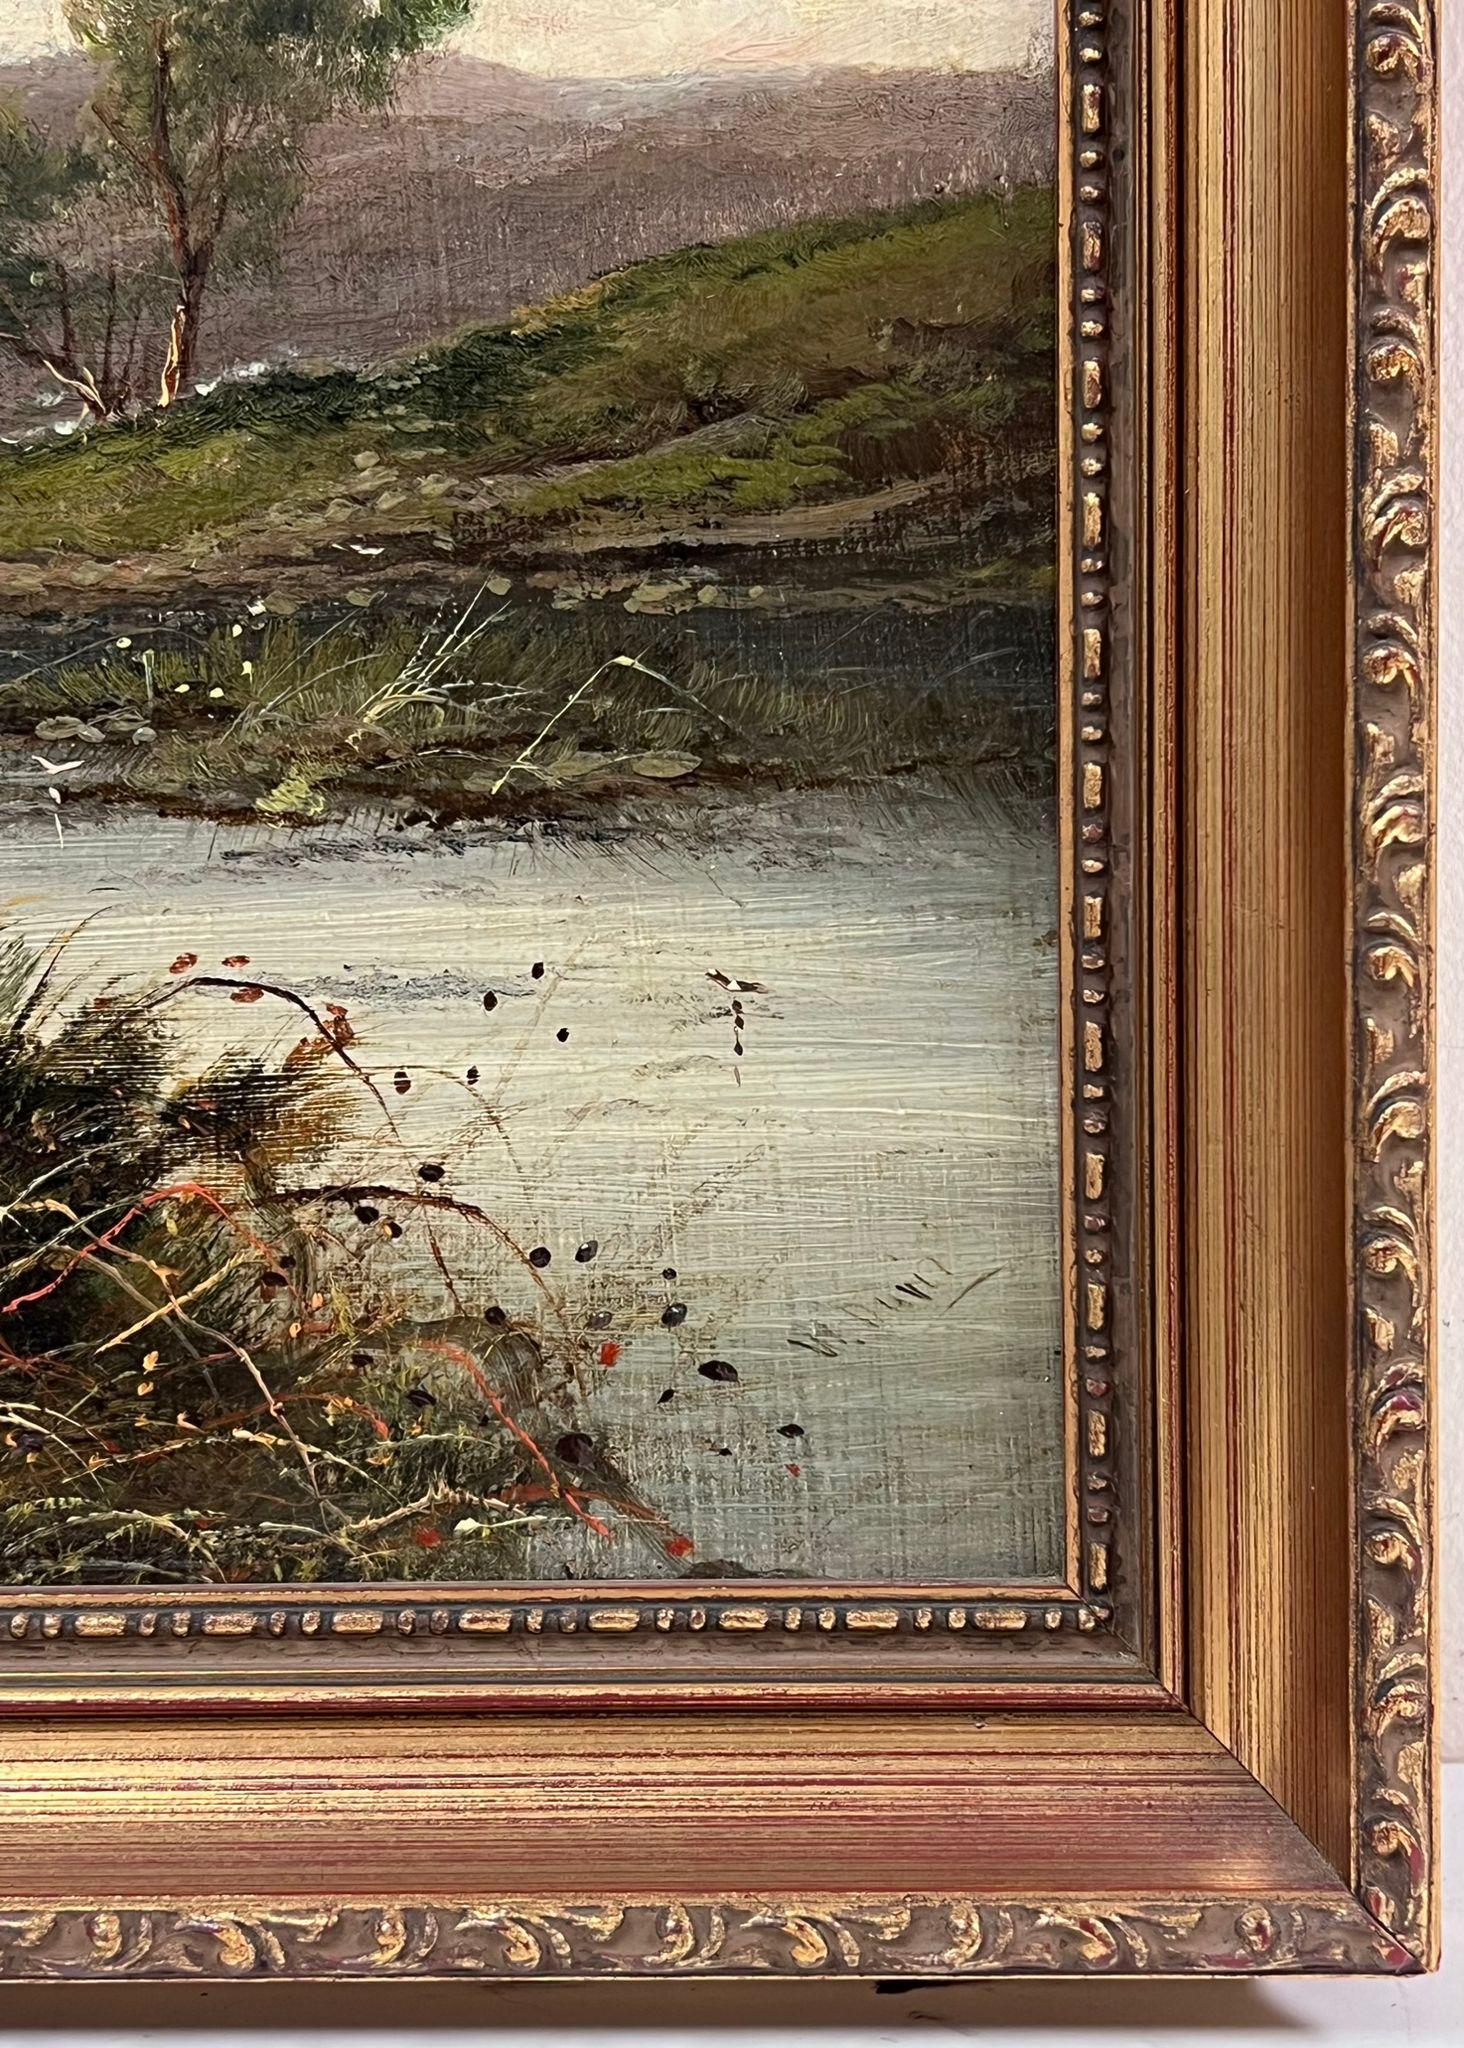 19th Century British Oil Painting Angler in River Landscape Rising Hills & Sky 3